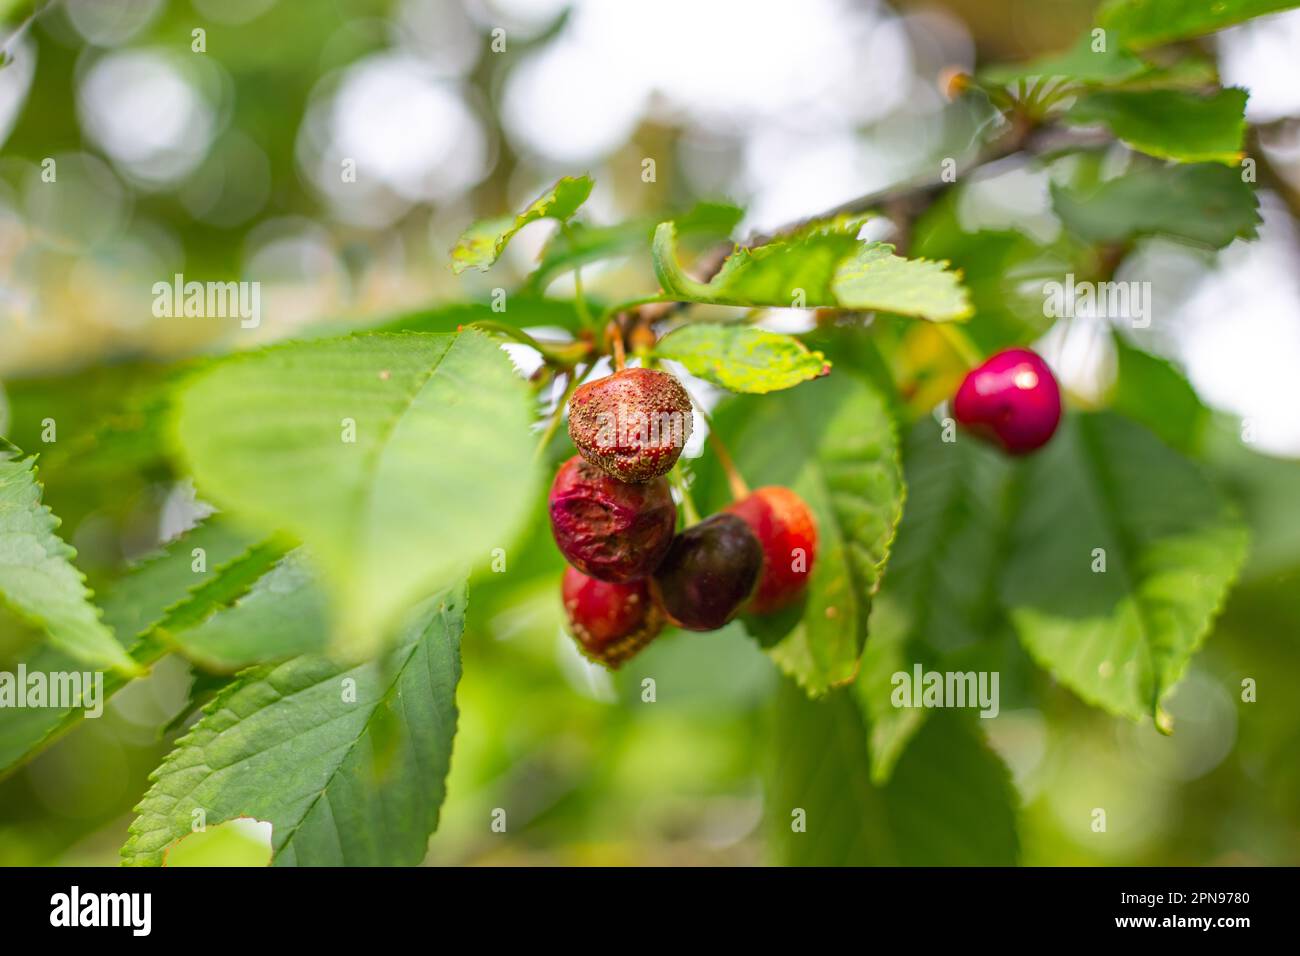 Berries of ripe cherries on a tree branch affected by gray rot. Disease moniliasis in ripe fruits. Stock Photo